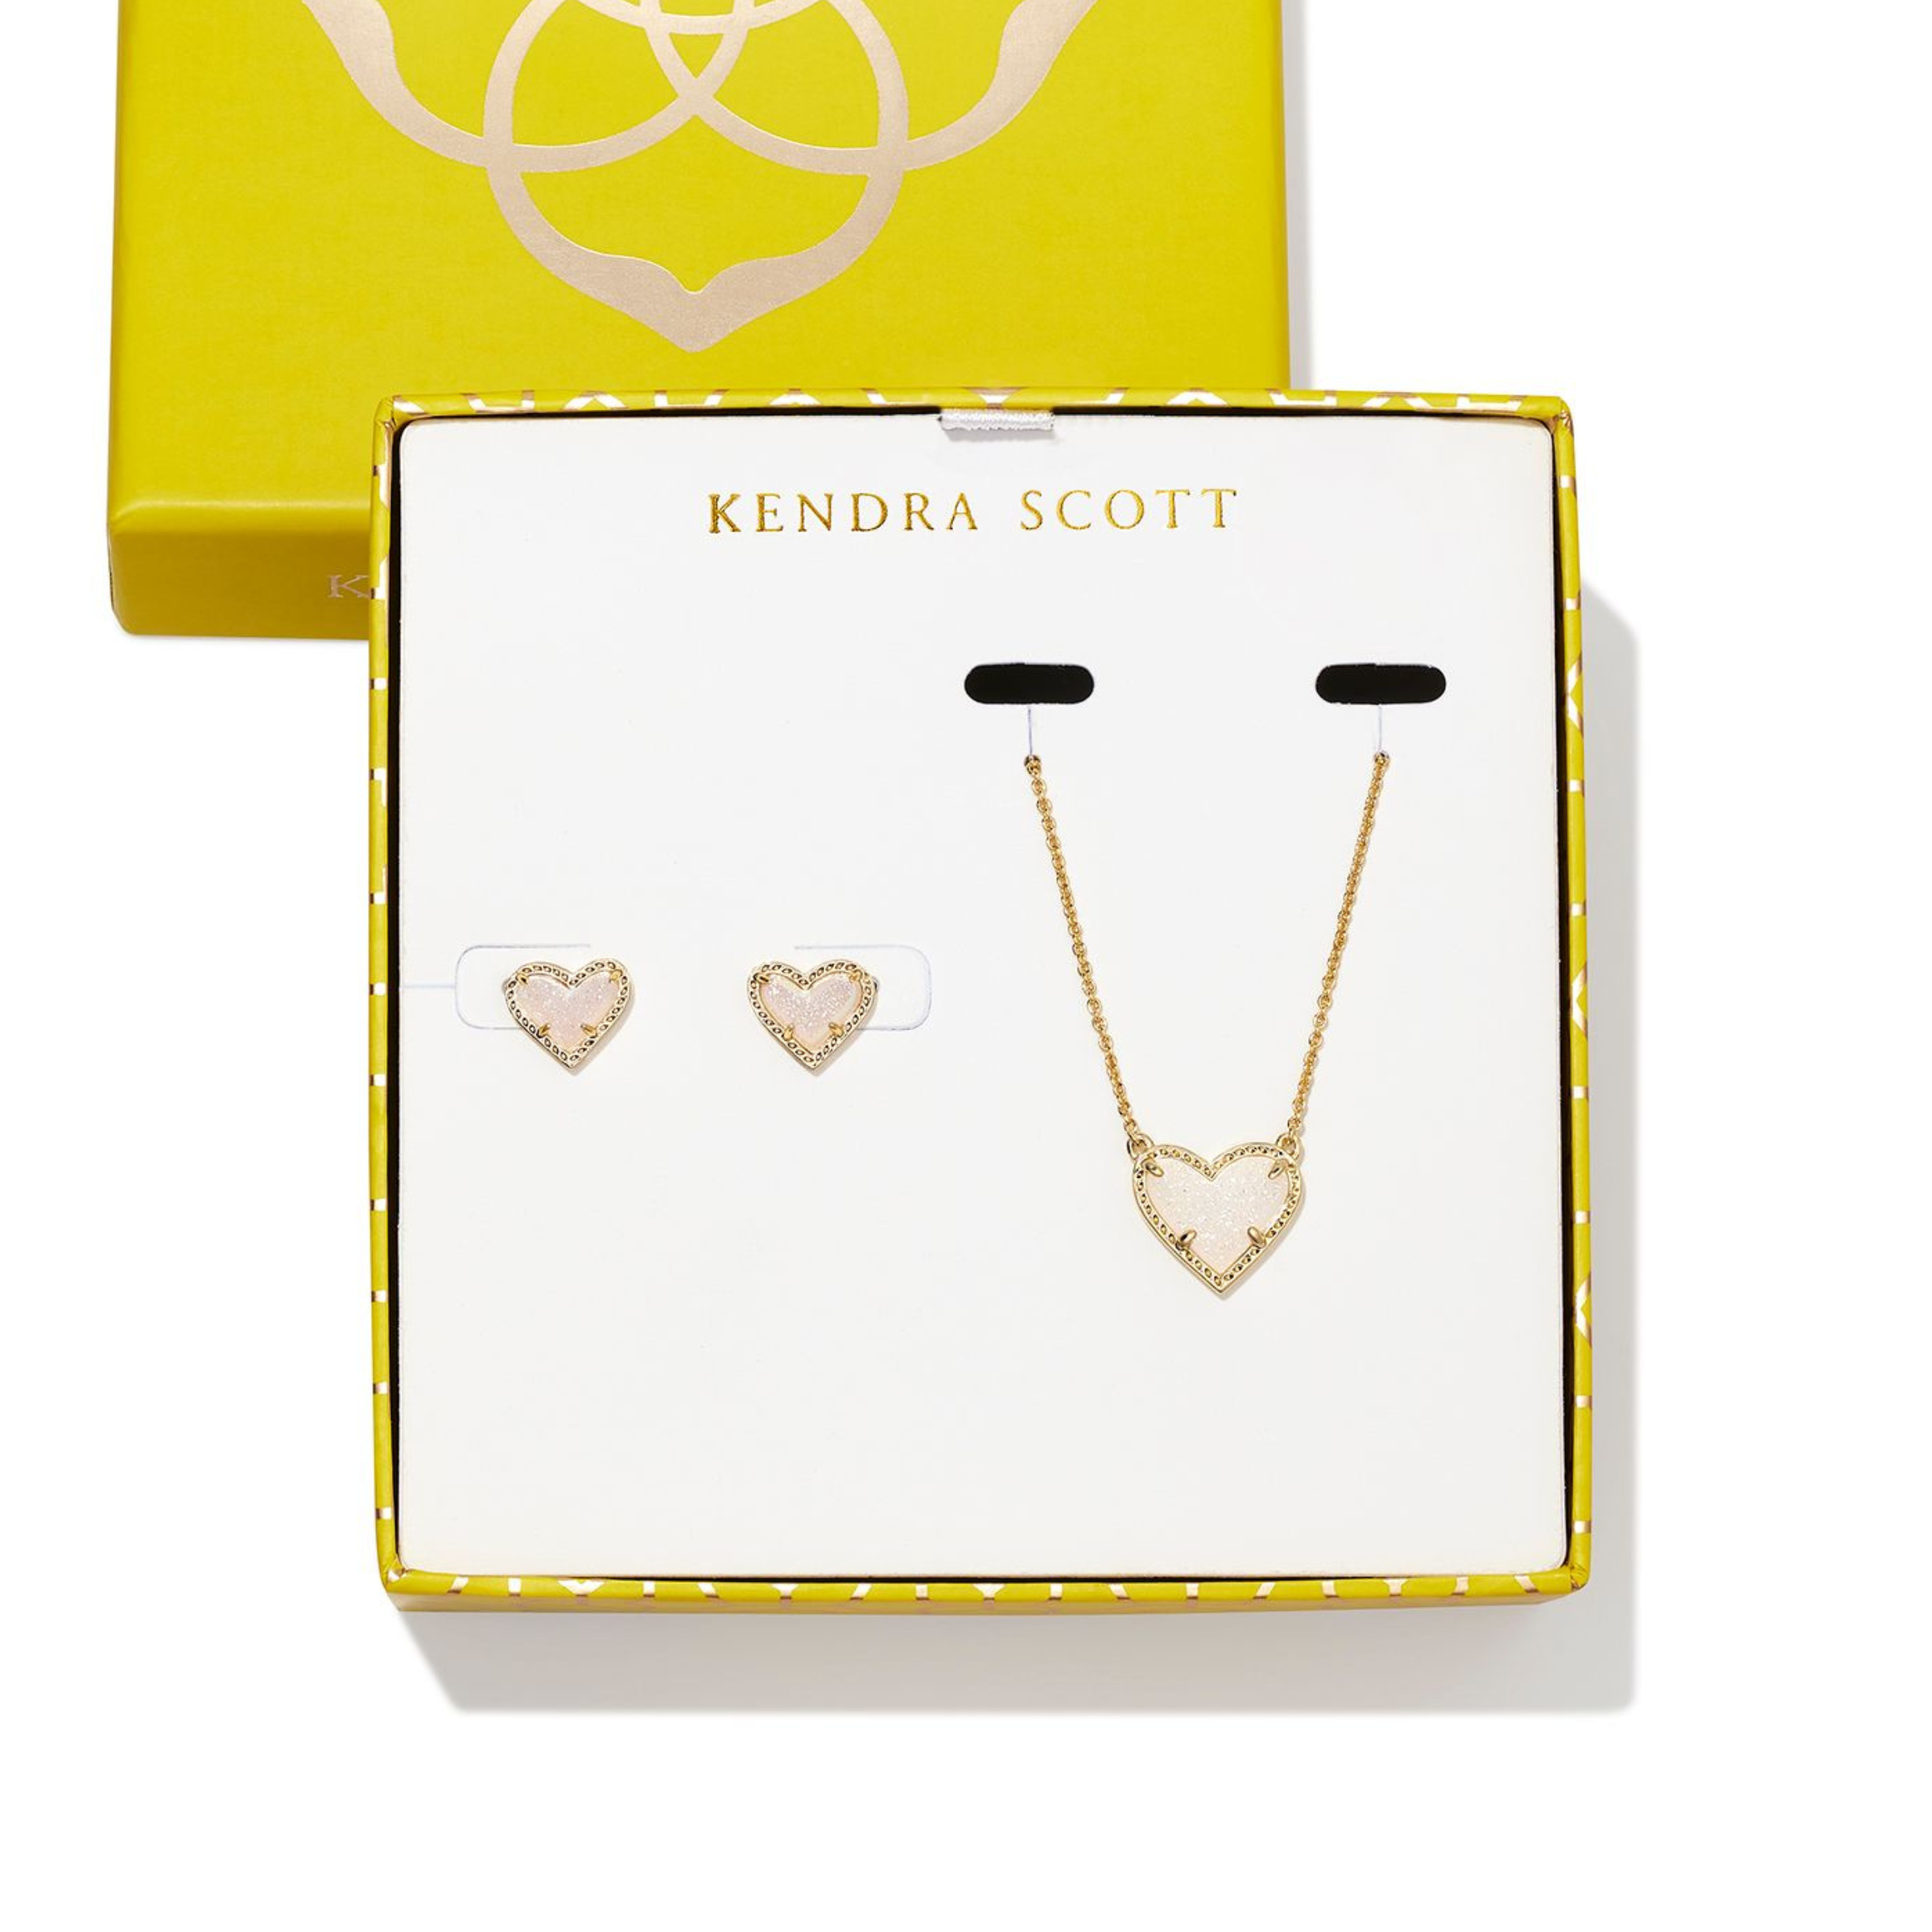 Gold necklace with heart pendnant and gold heart earrings pictured on a Kendra Scott box. The hearts include iridescent drusy stones.